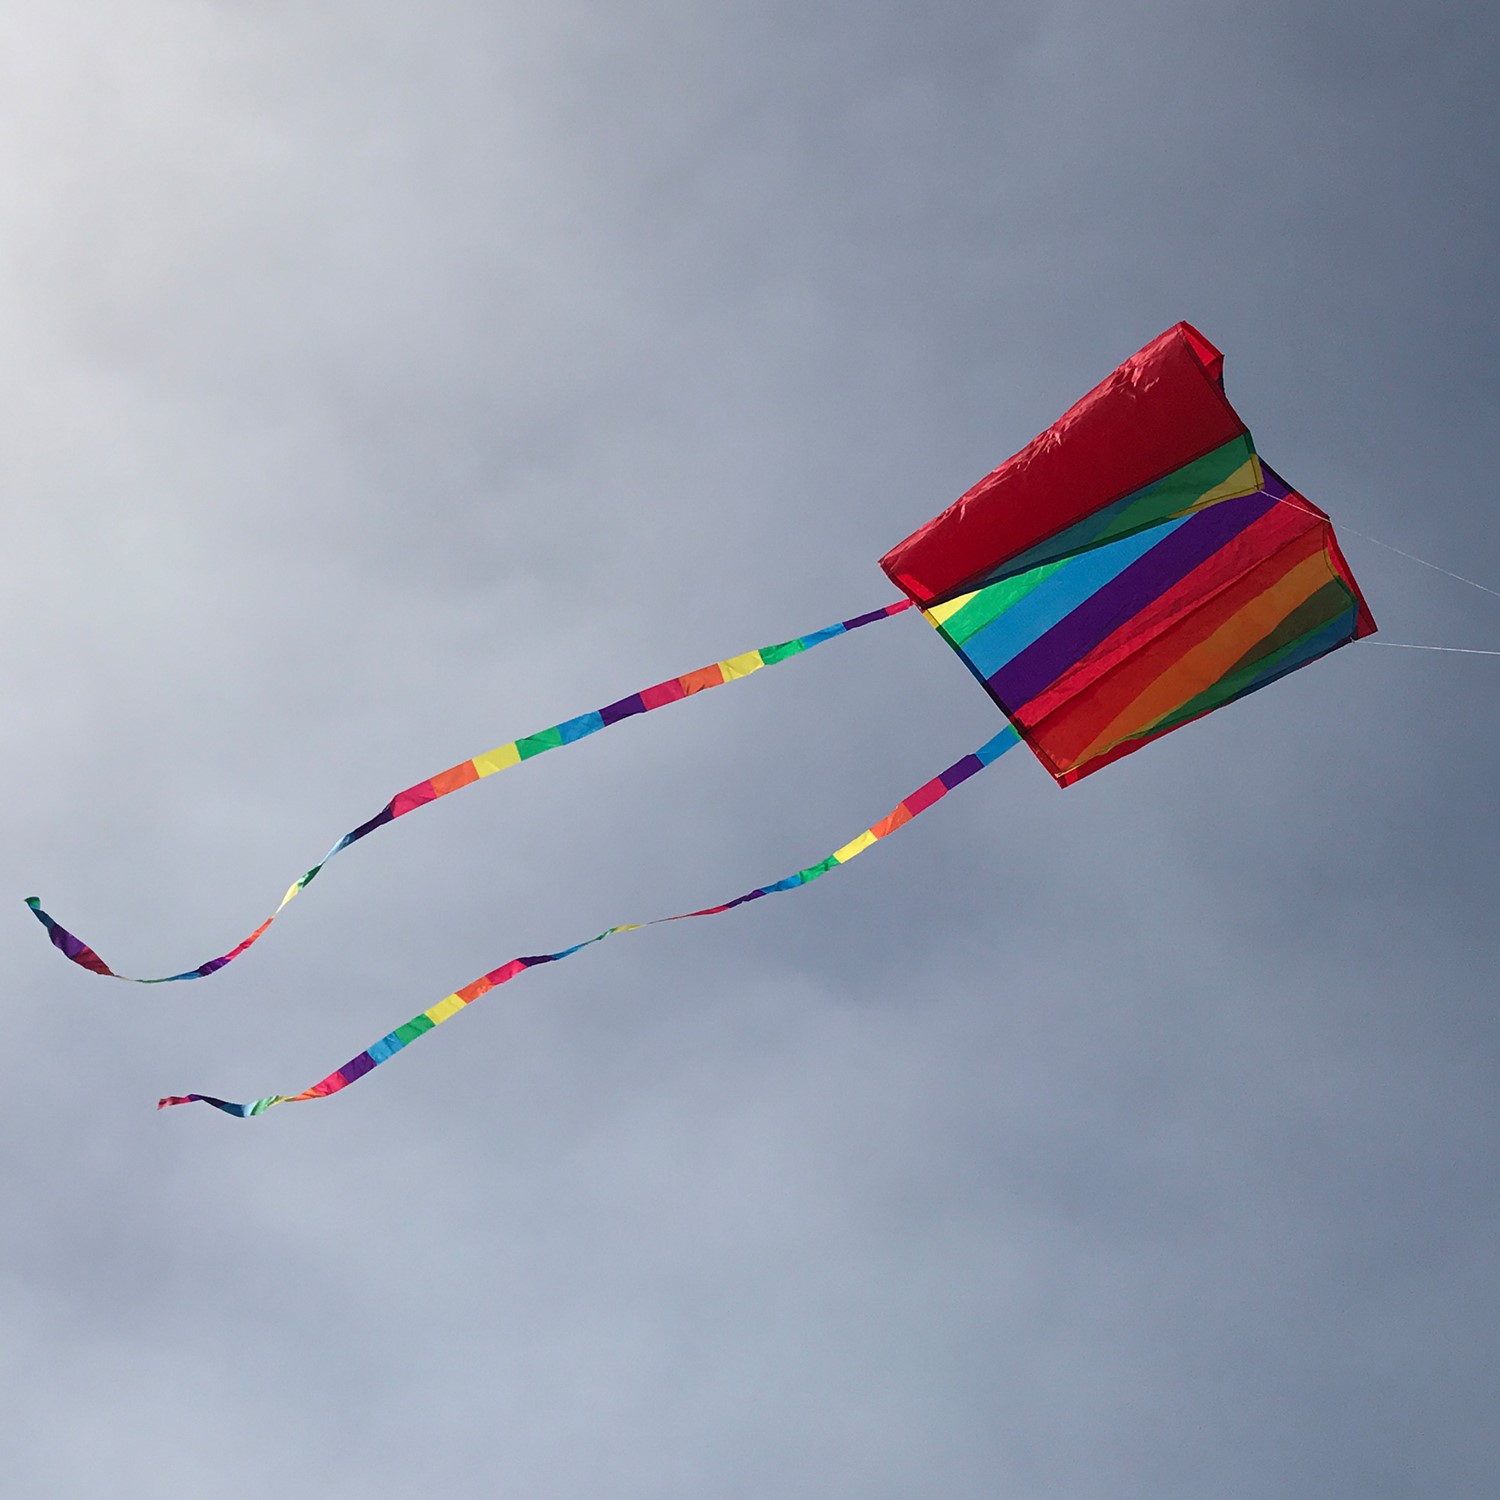 HQ Kites Pocket Sled, Single Line Kite, Color: Rainbow, Active Outdoor Fun  For Ages 5 and Up